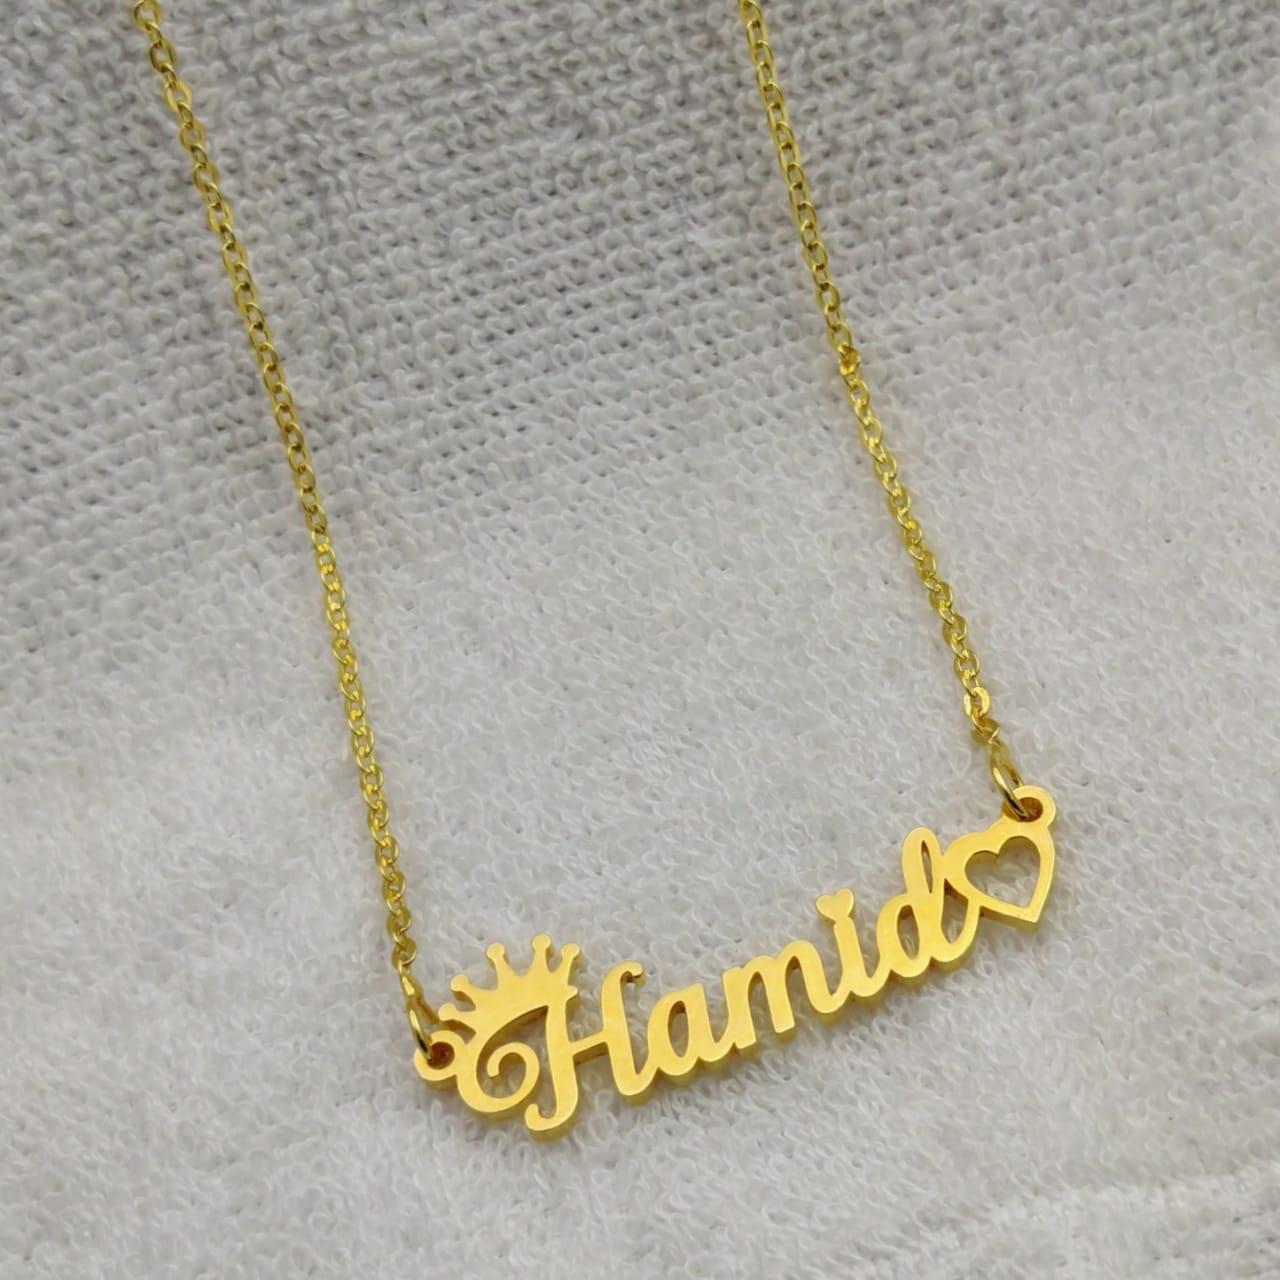 Customized Metal Necklace - Personalized Name Necklace ...